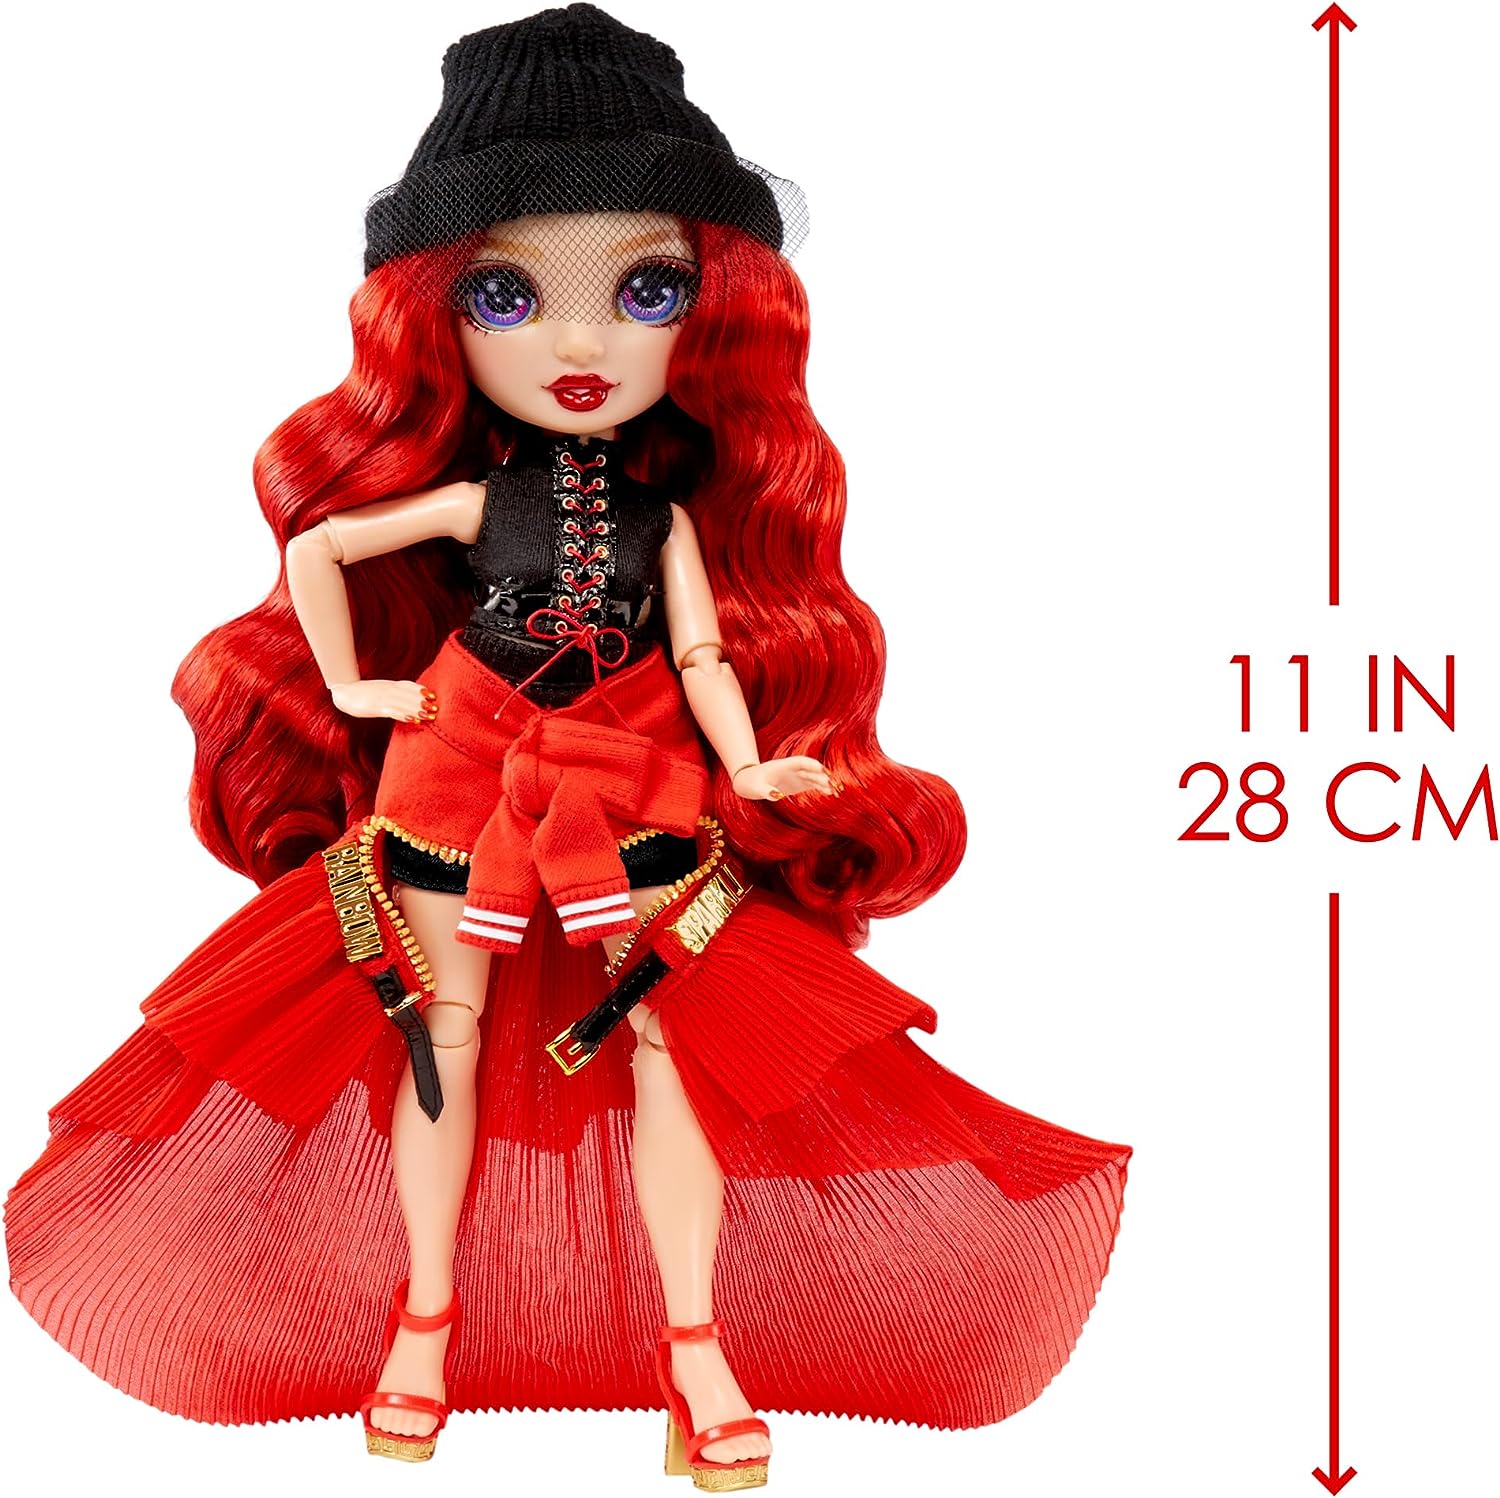 Rainbow High Fantastic Fashion Ruby Anderson - Red 11” Fashion Doll and Playset with 2 Complete Doll Outfits, and Fashion Play Accessories